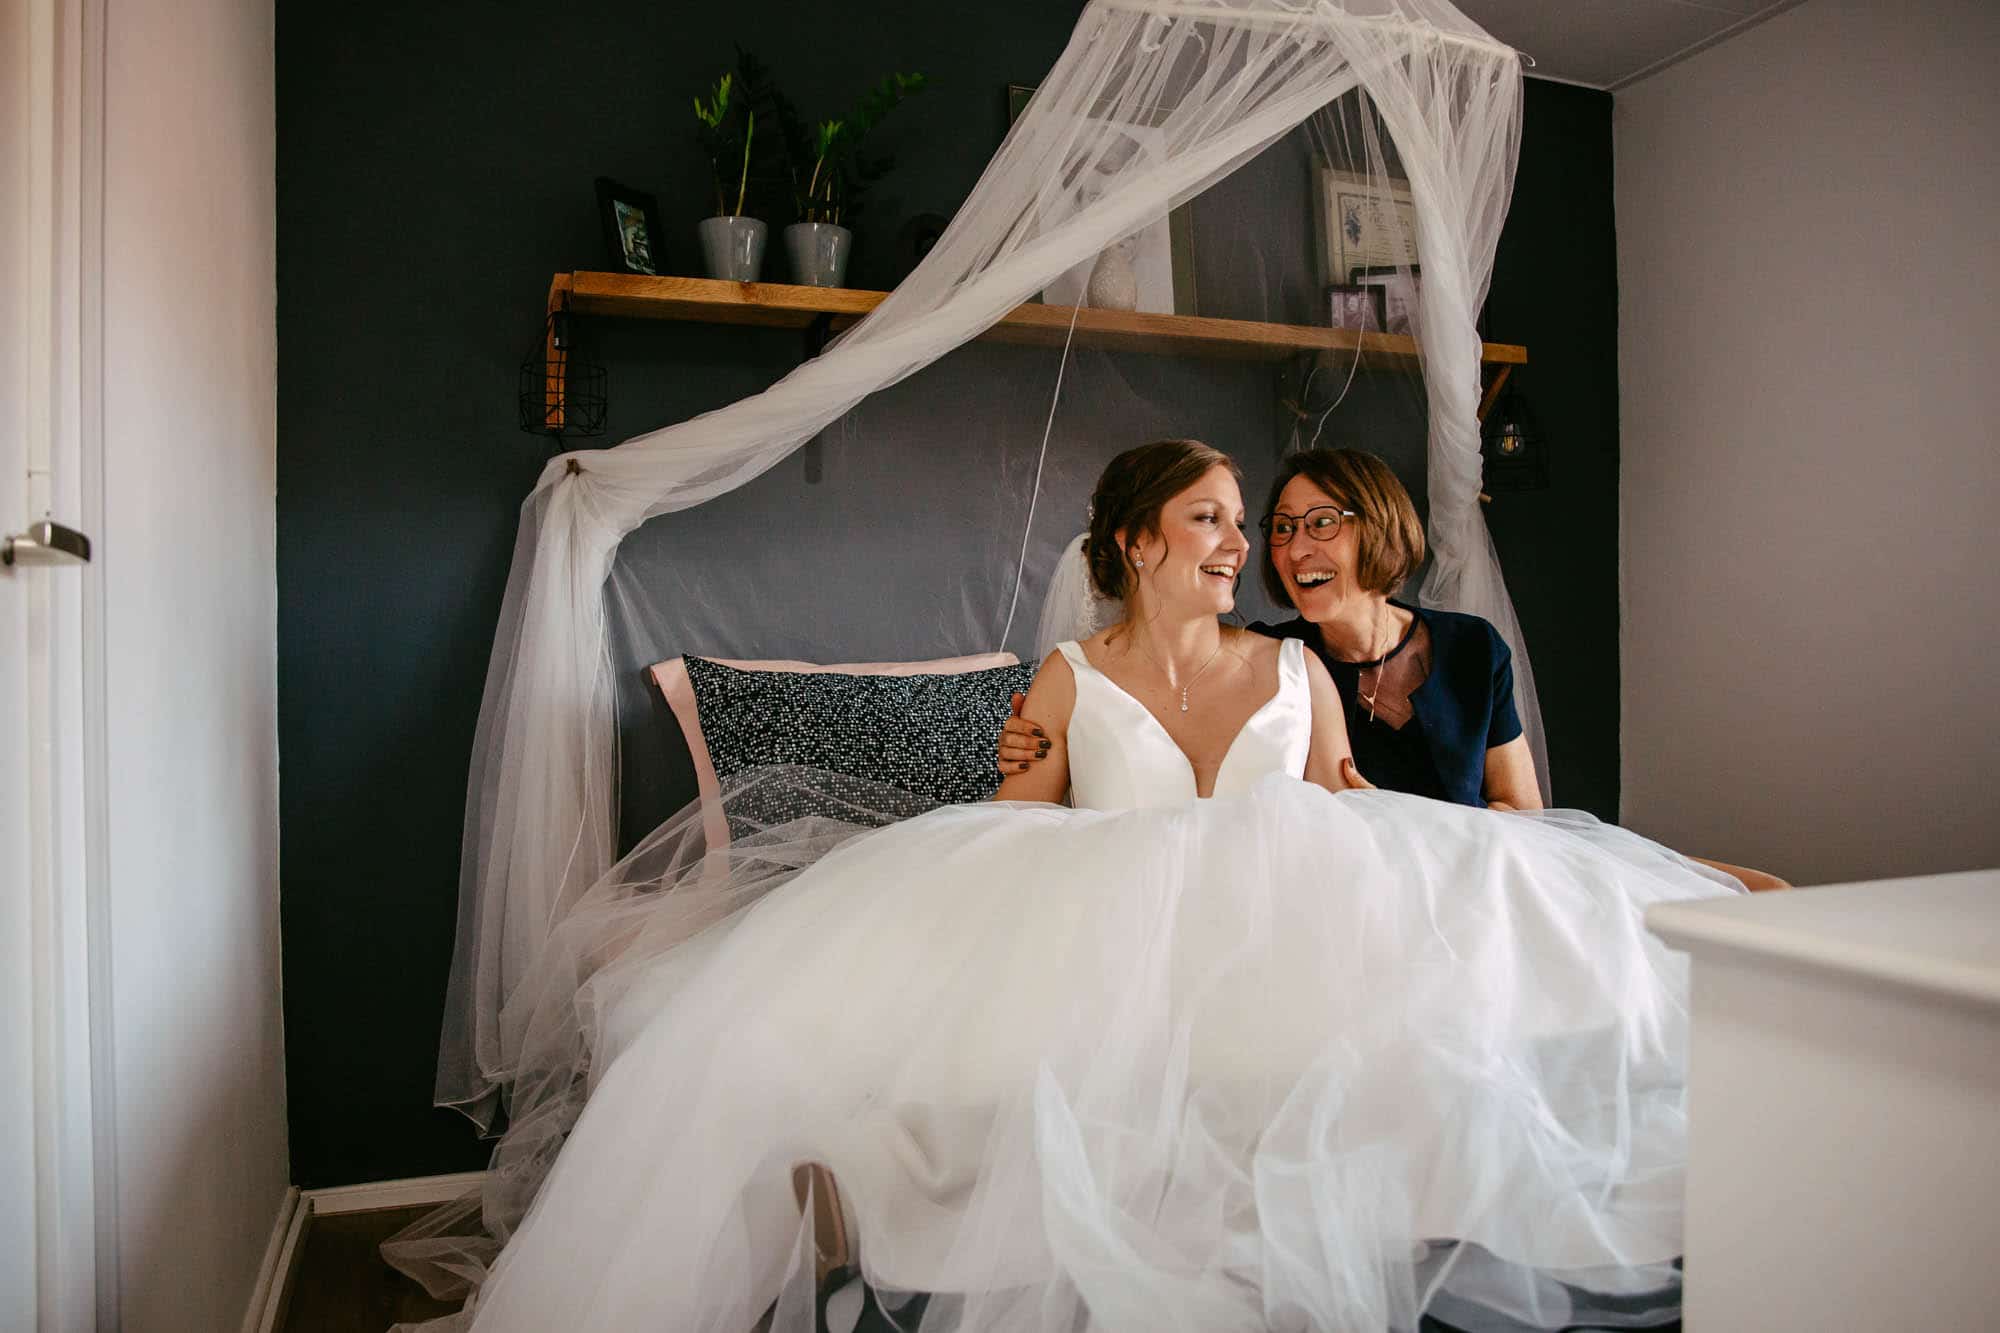 A bride and her mother sit on a bed in a bedroom.